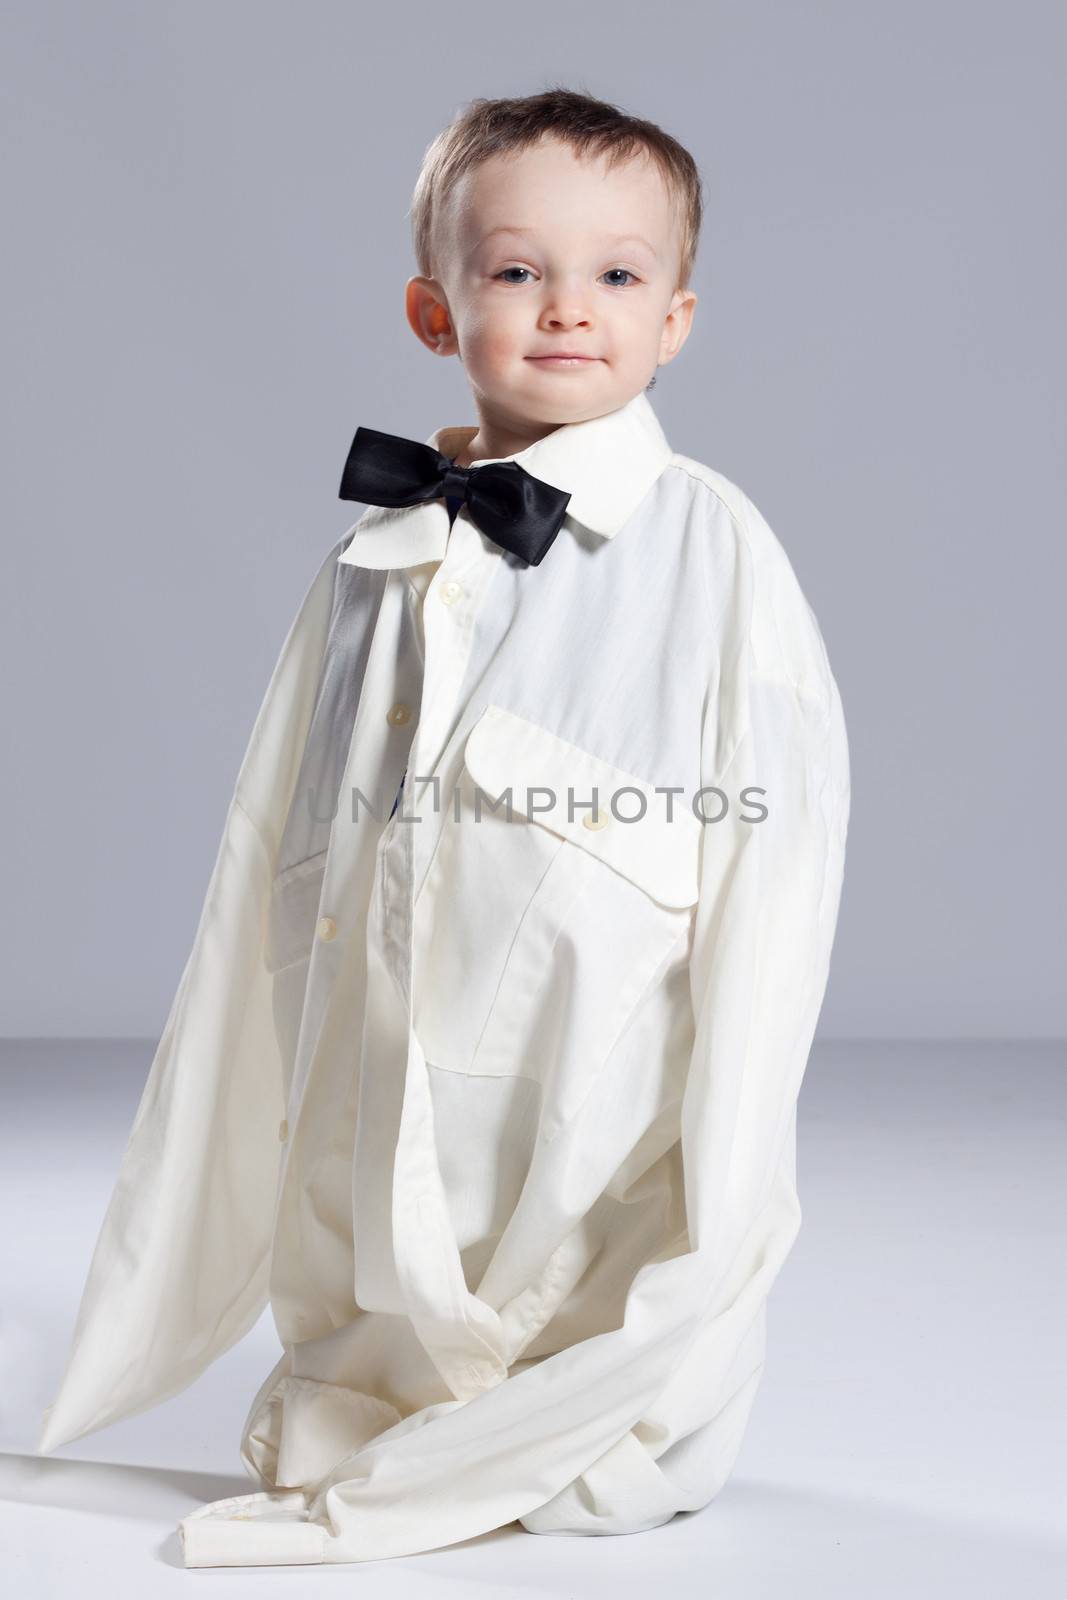 Boy toddler businessman, standing dressed in grown-shirt with bow tie